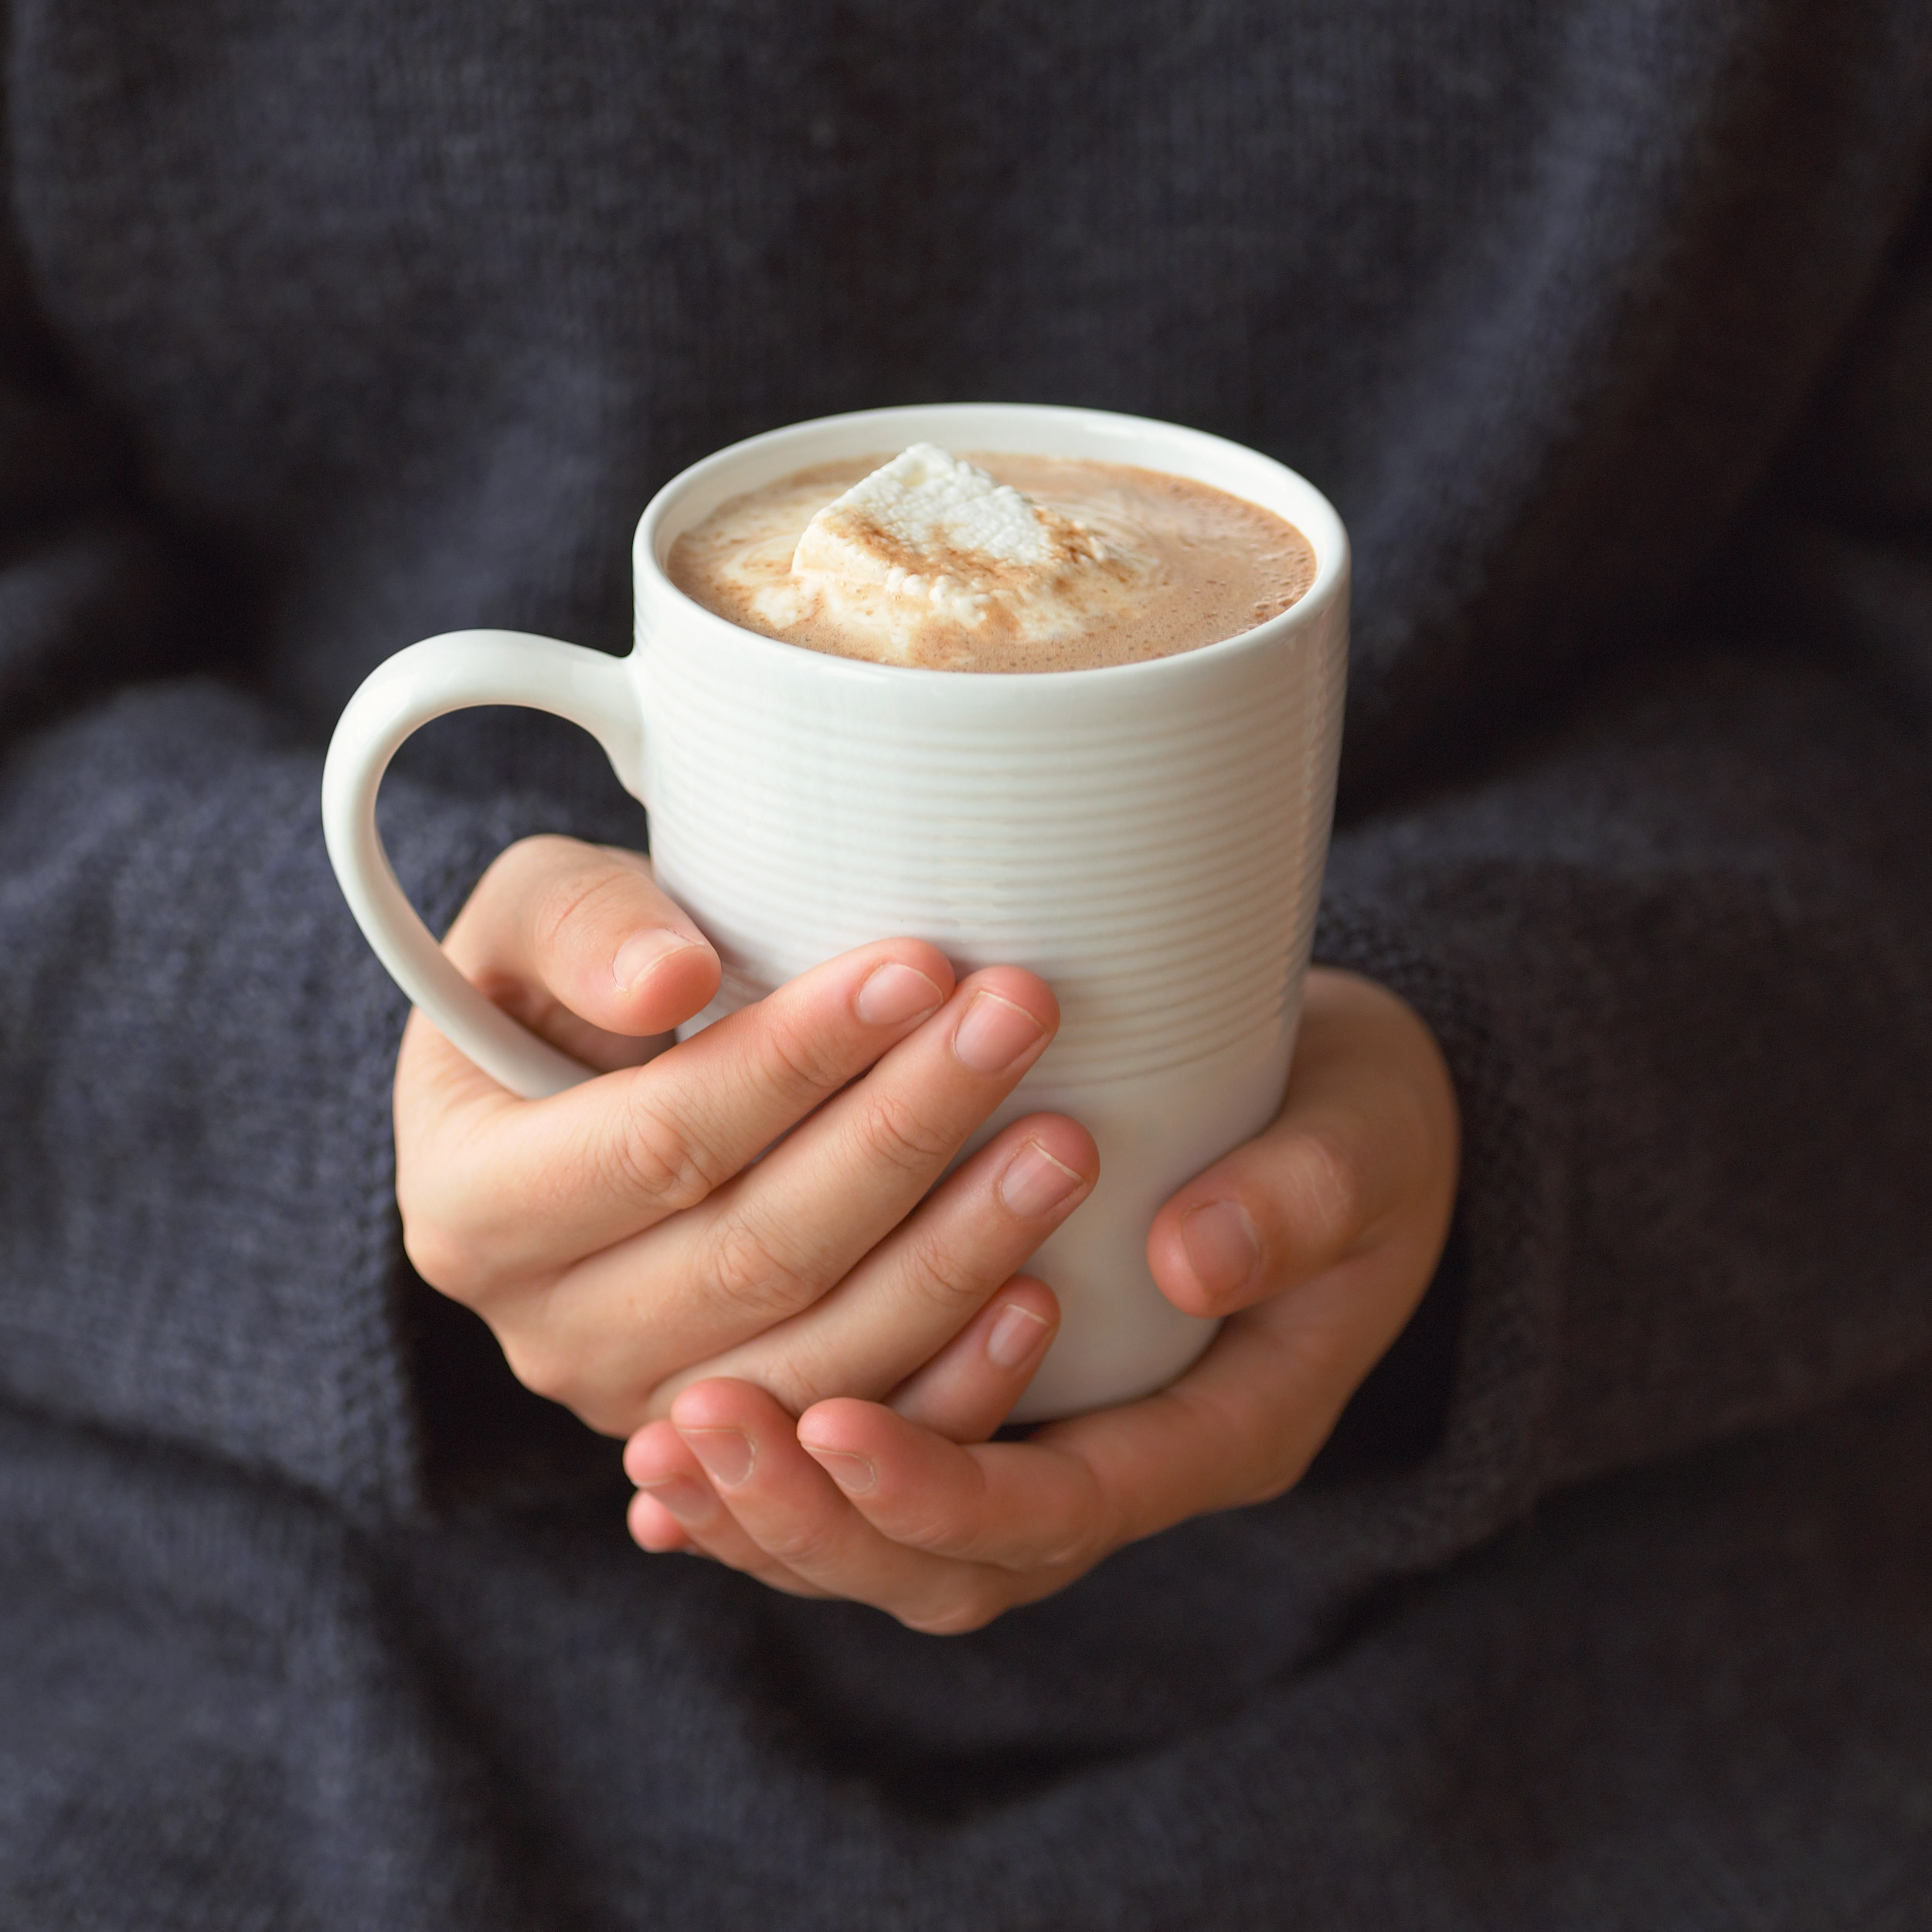 Annabelle_Breakey_Beverage_Photographer_Food_Photography_hot-chocolate-marshmallow